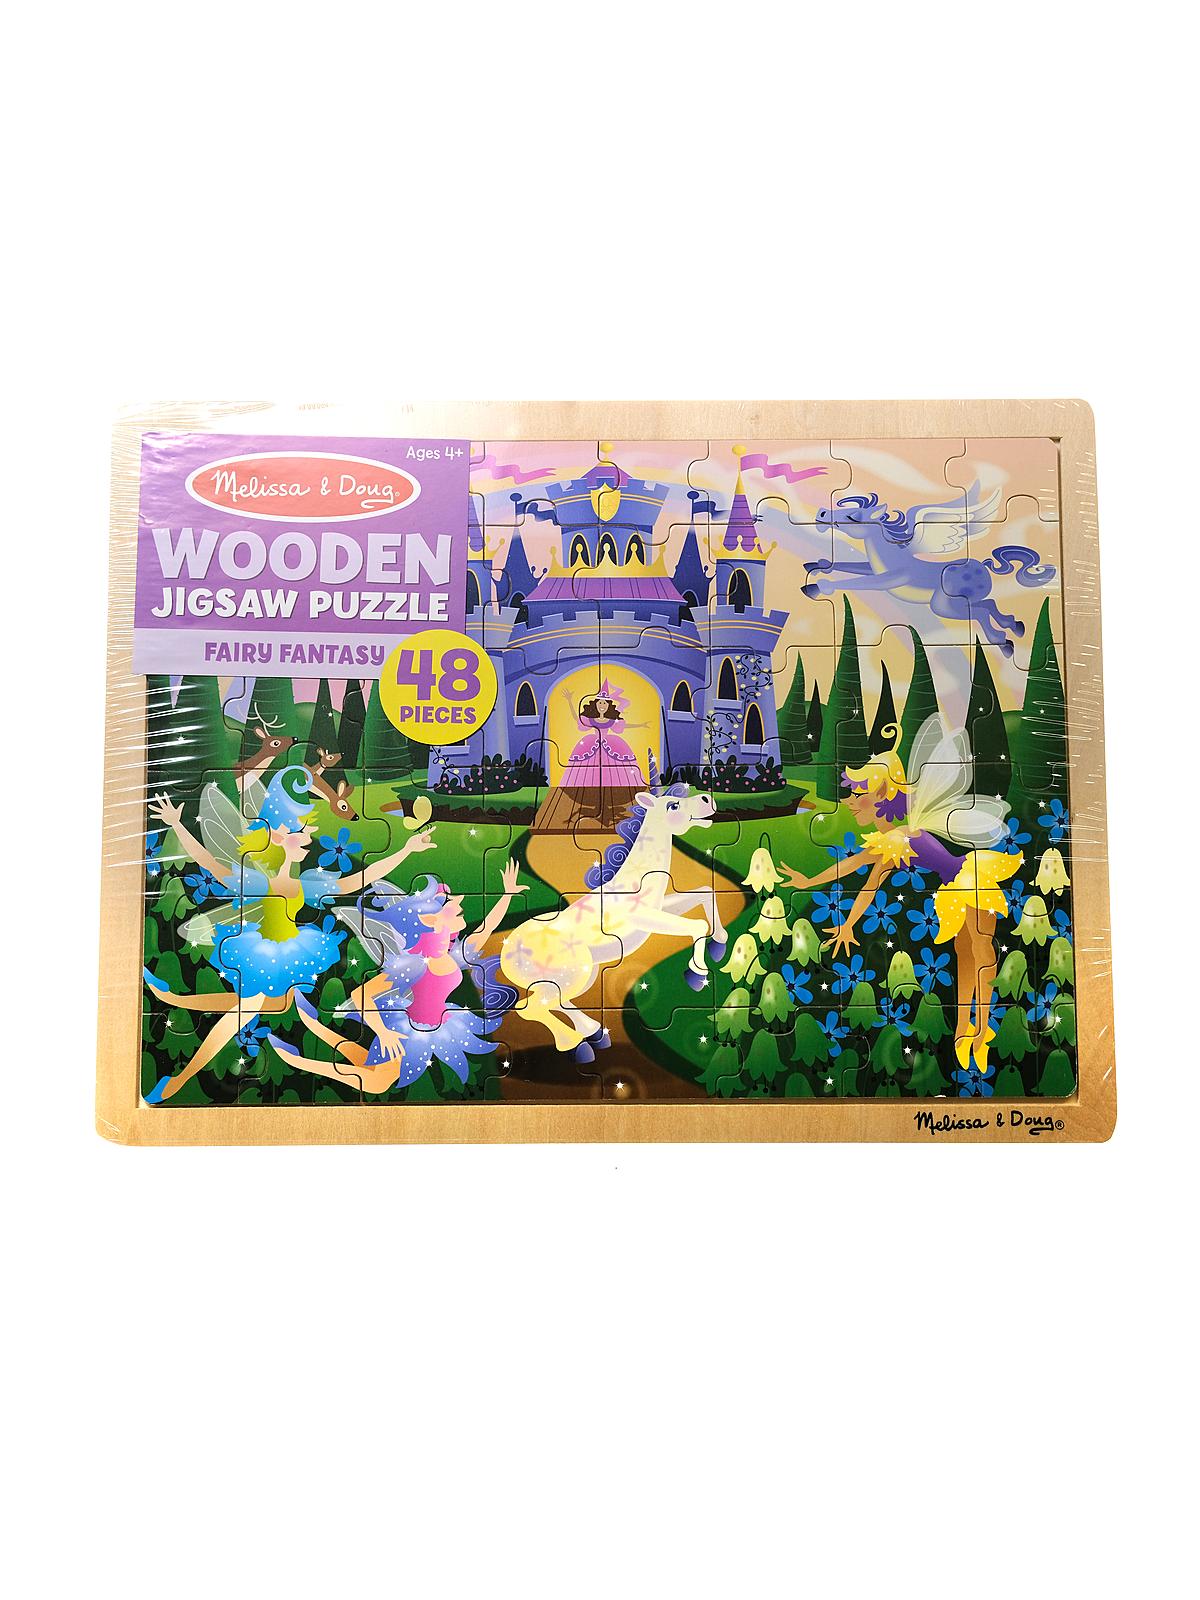 Wooden Jigsaw Puzzles To The Rescue 24 Pieces